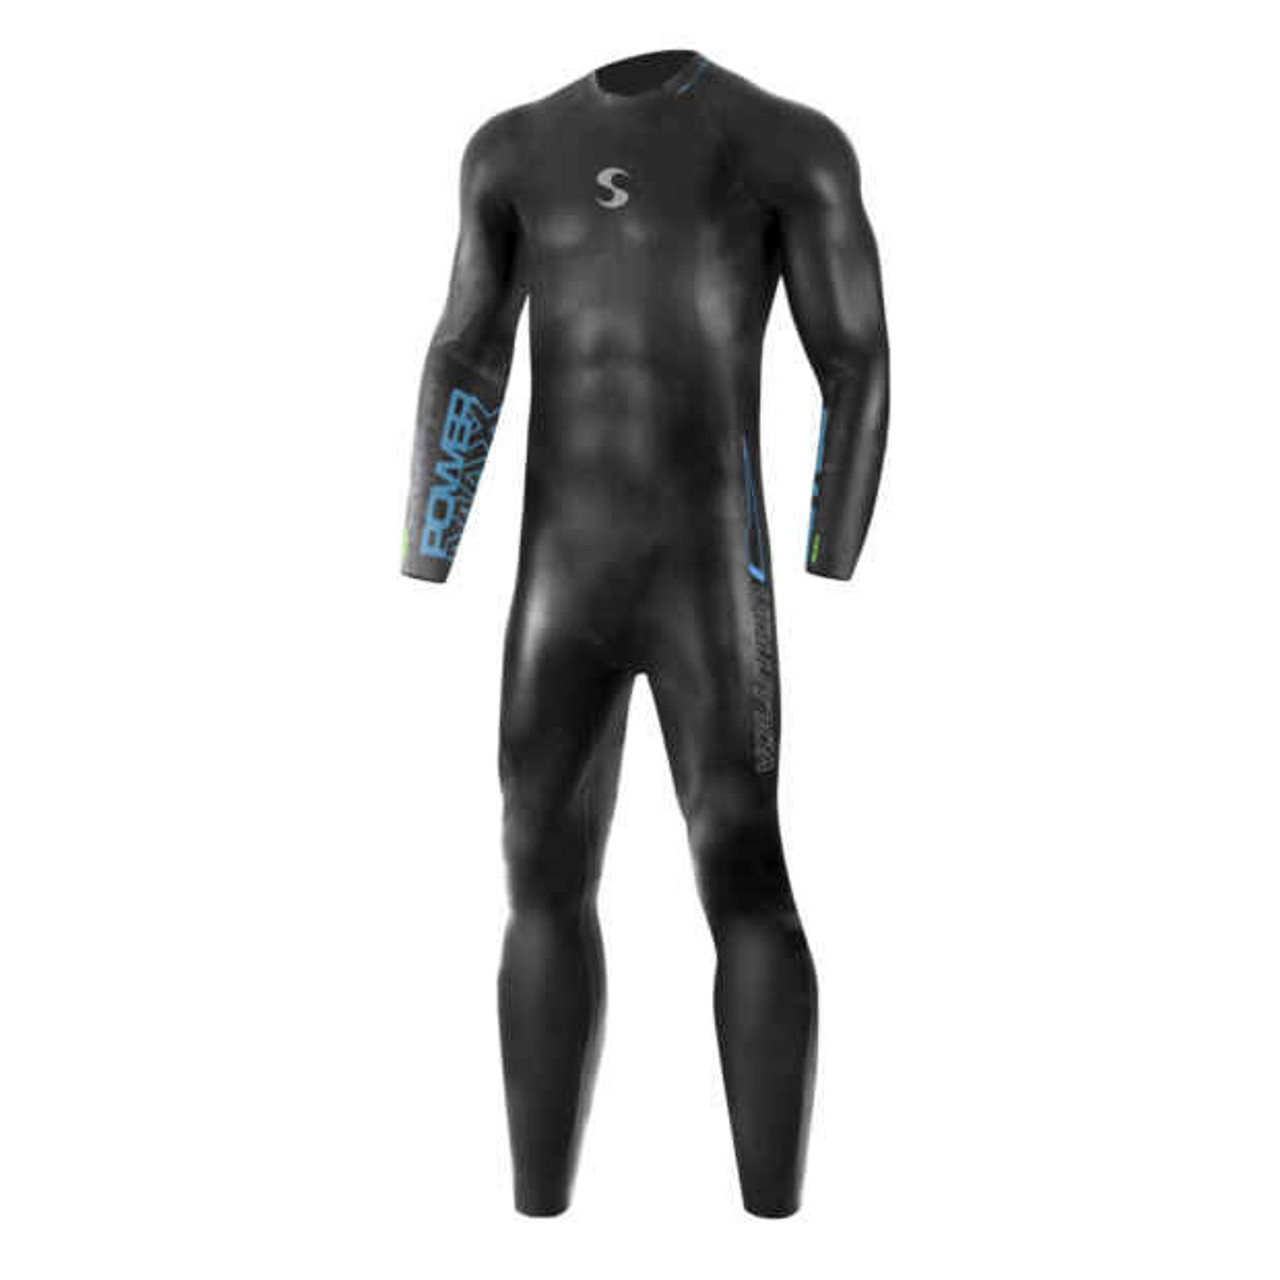 Shaker Bottle Combo-3 Pack - Synergy Wetsuits